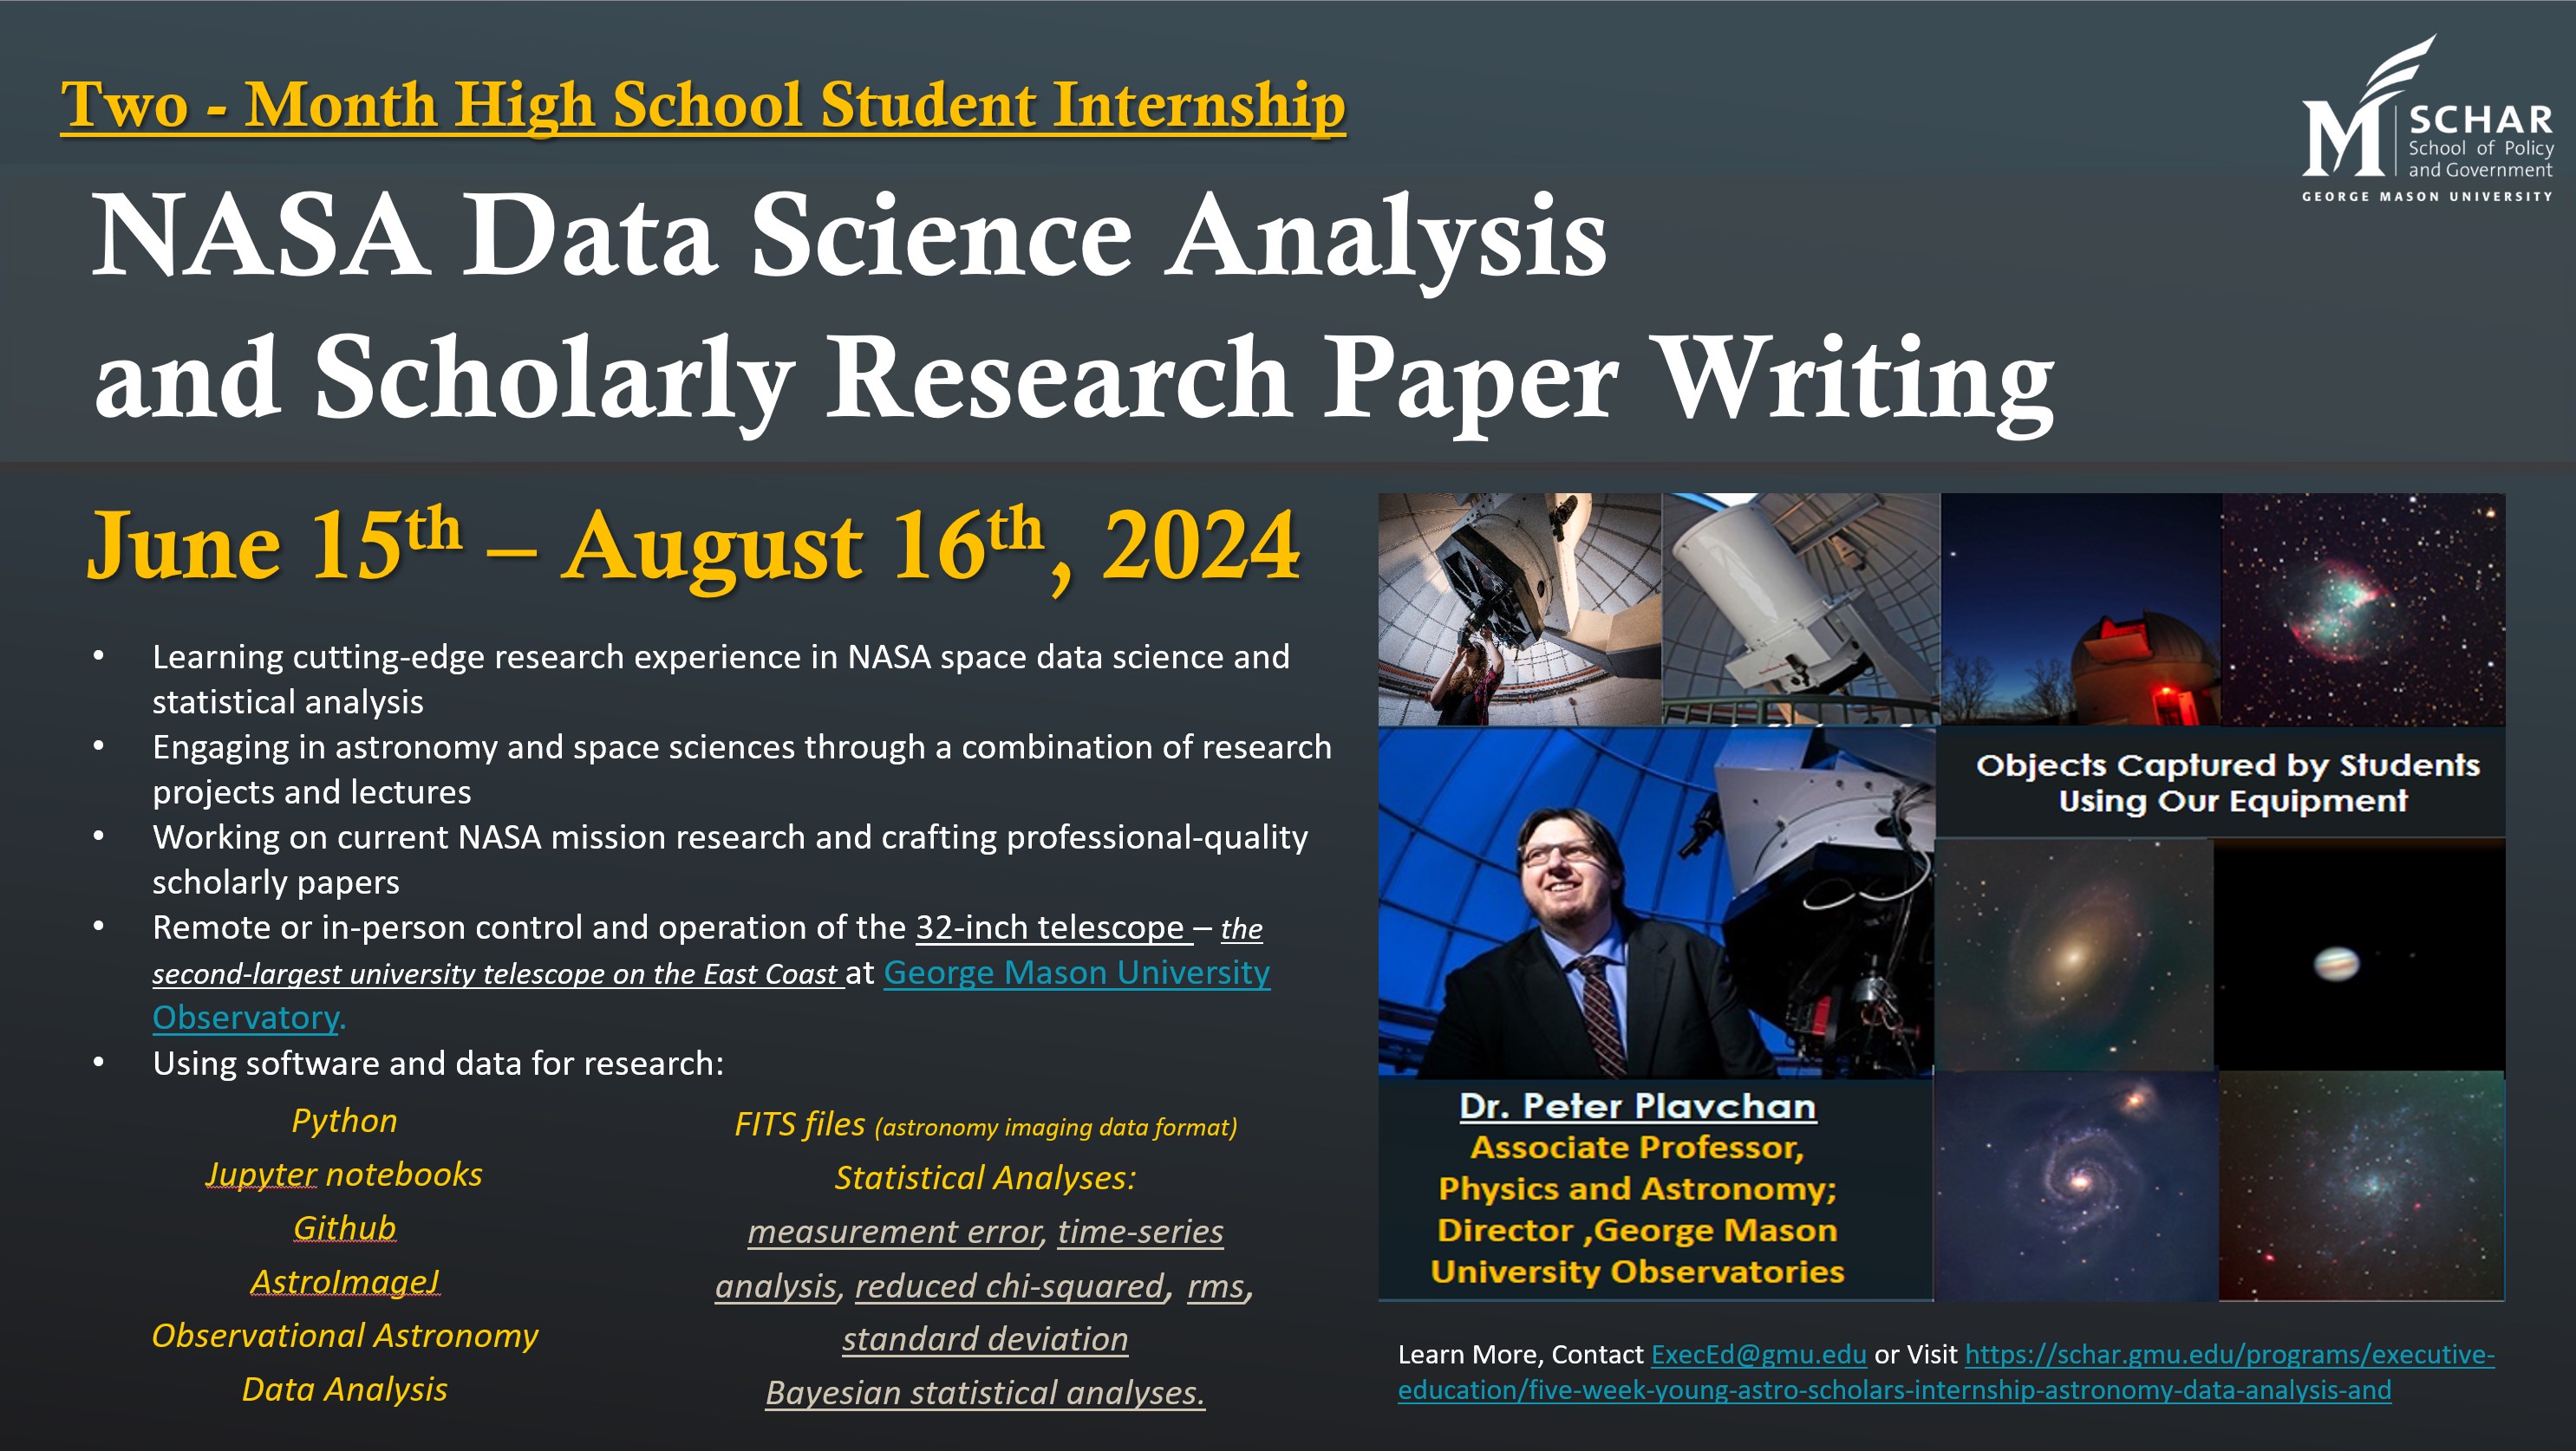 A flyer providing details on the Summer 2024 NASA Data Science Analysis and Scholarly Research Paper Writing two month internship